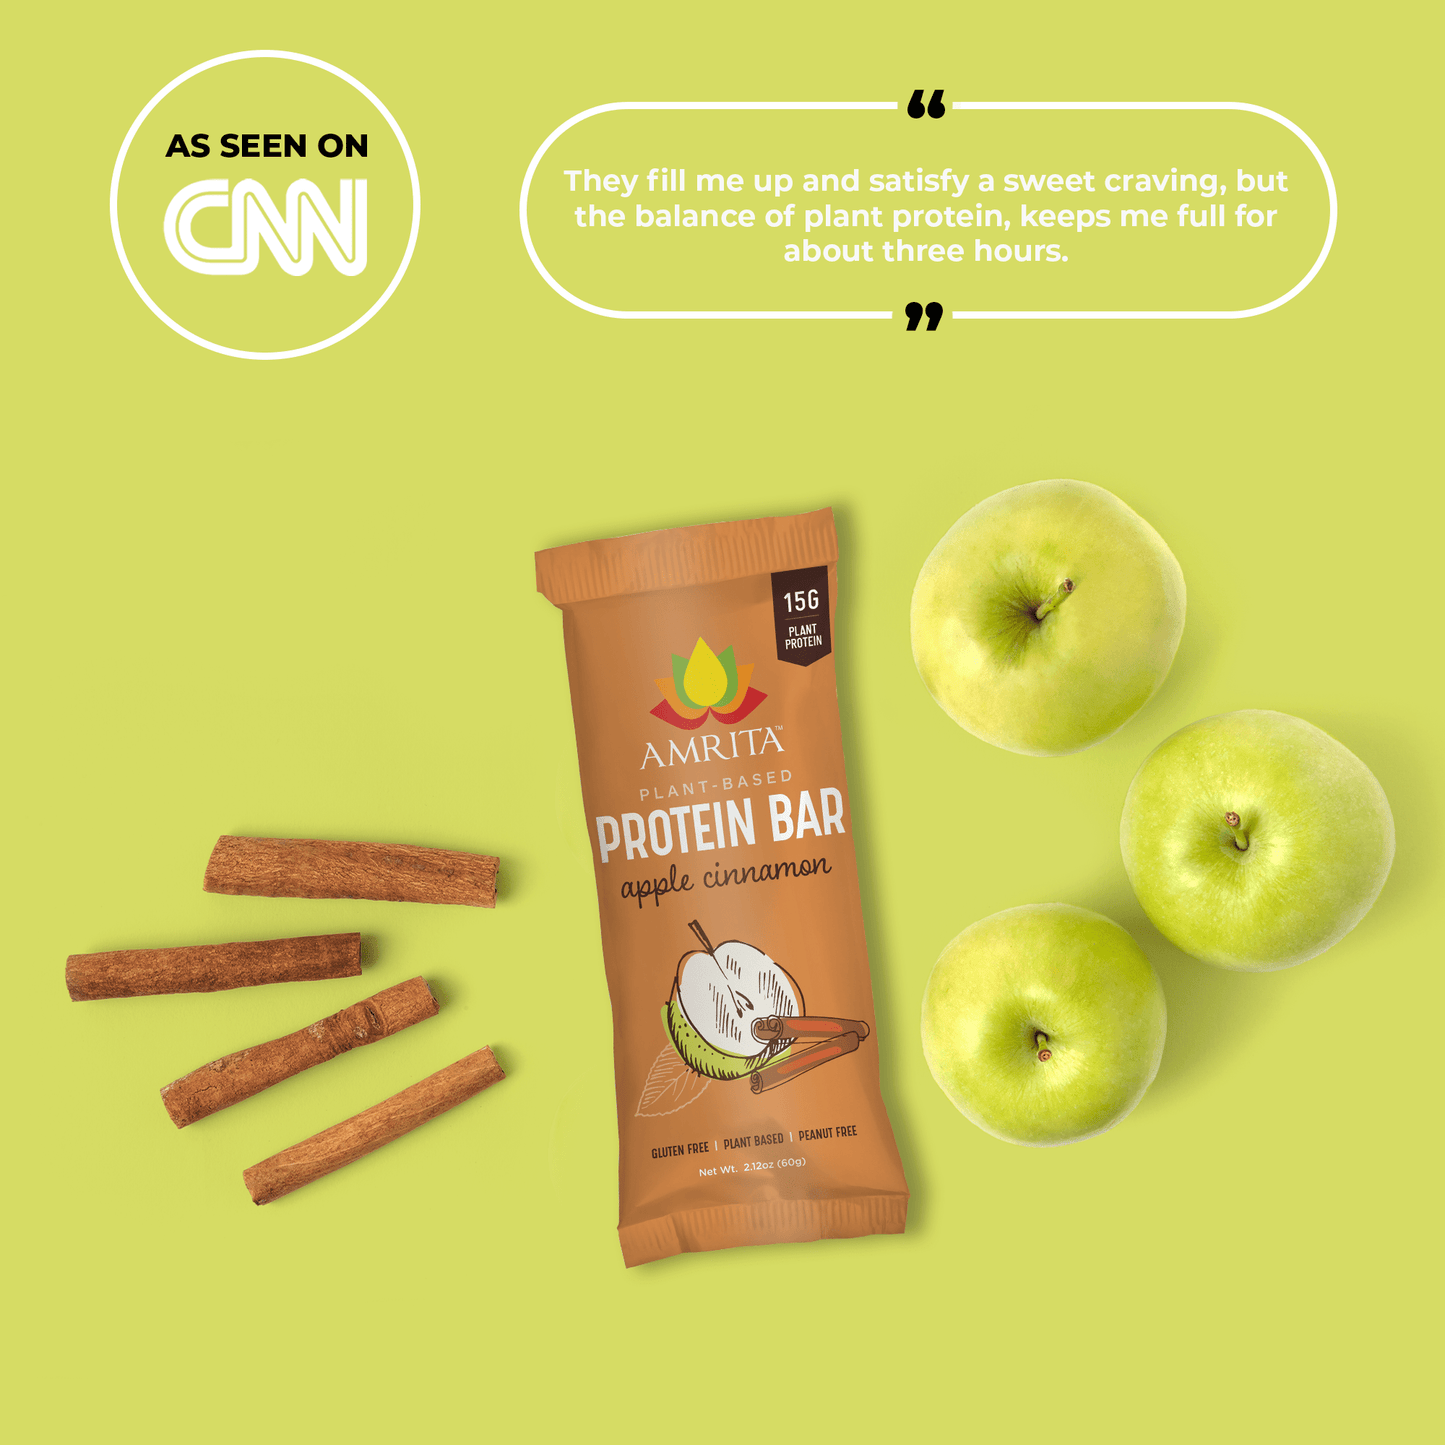 Apple Cinnamon High Protein Bars Customer Review - They fill me up and satisfy a sweet craving, but the balance of plant protein keeps me full for about three hours